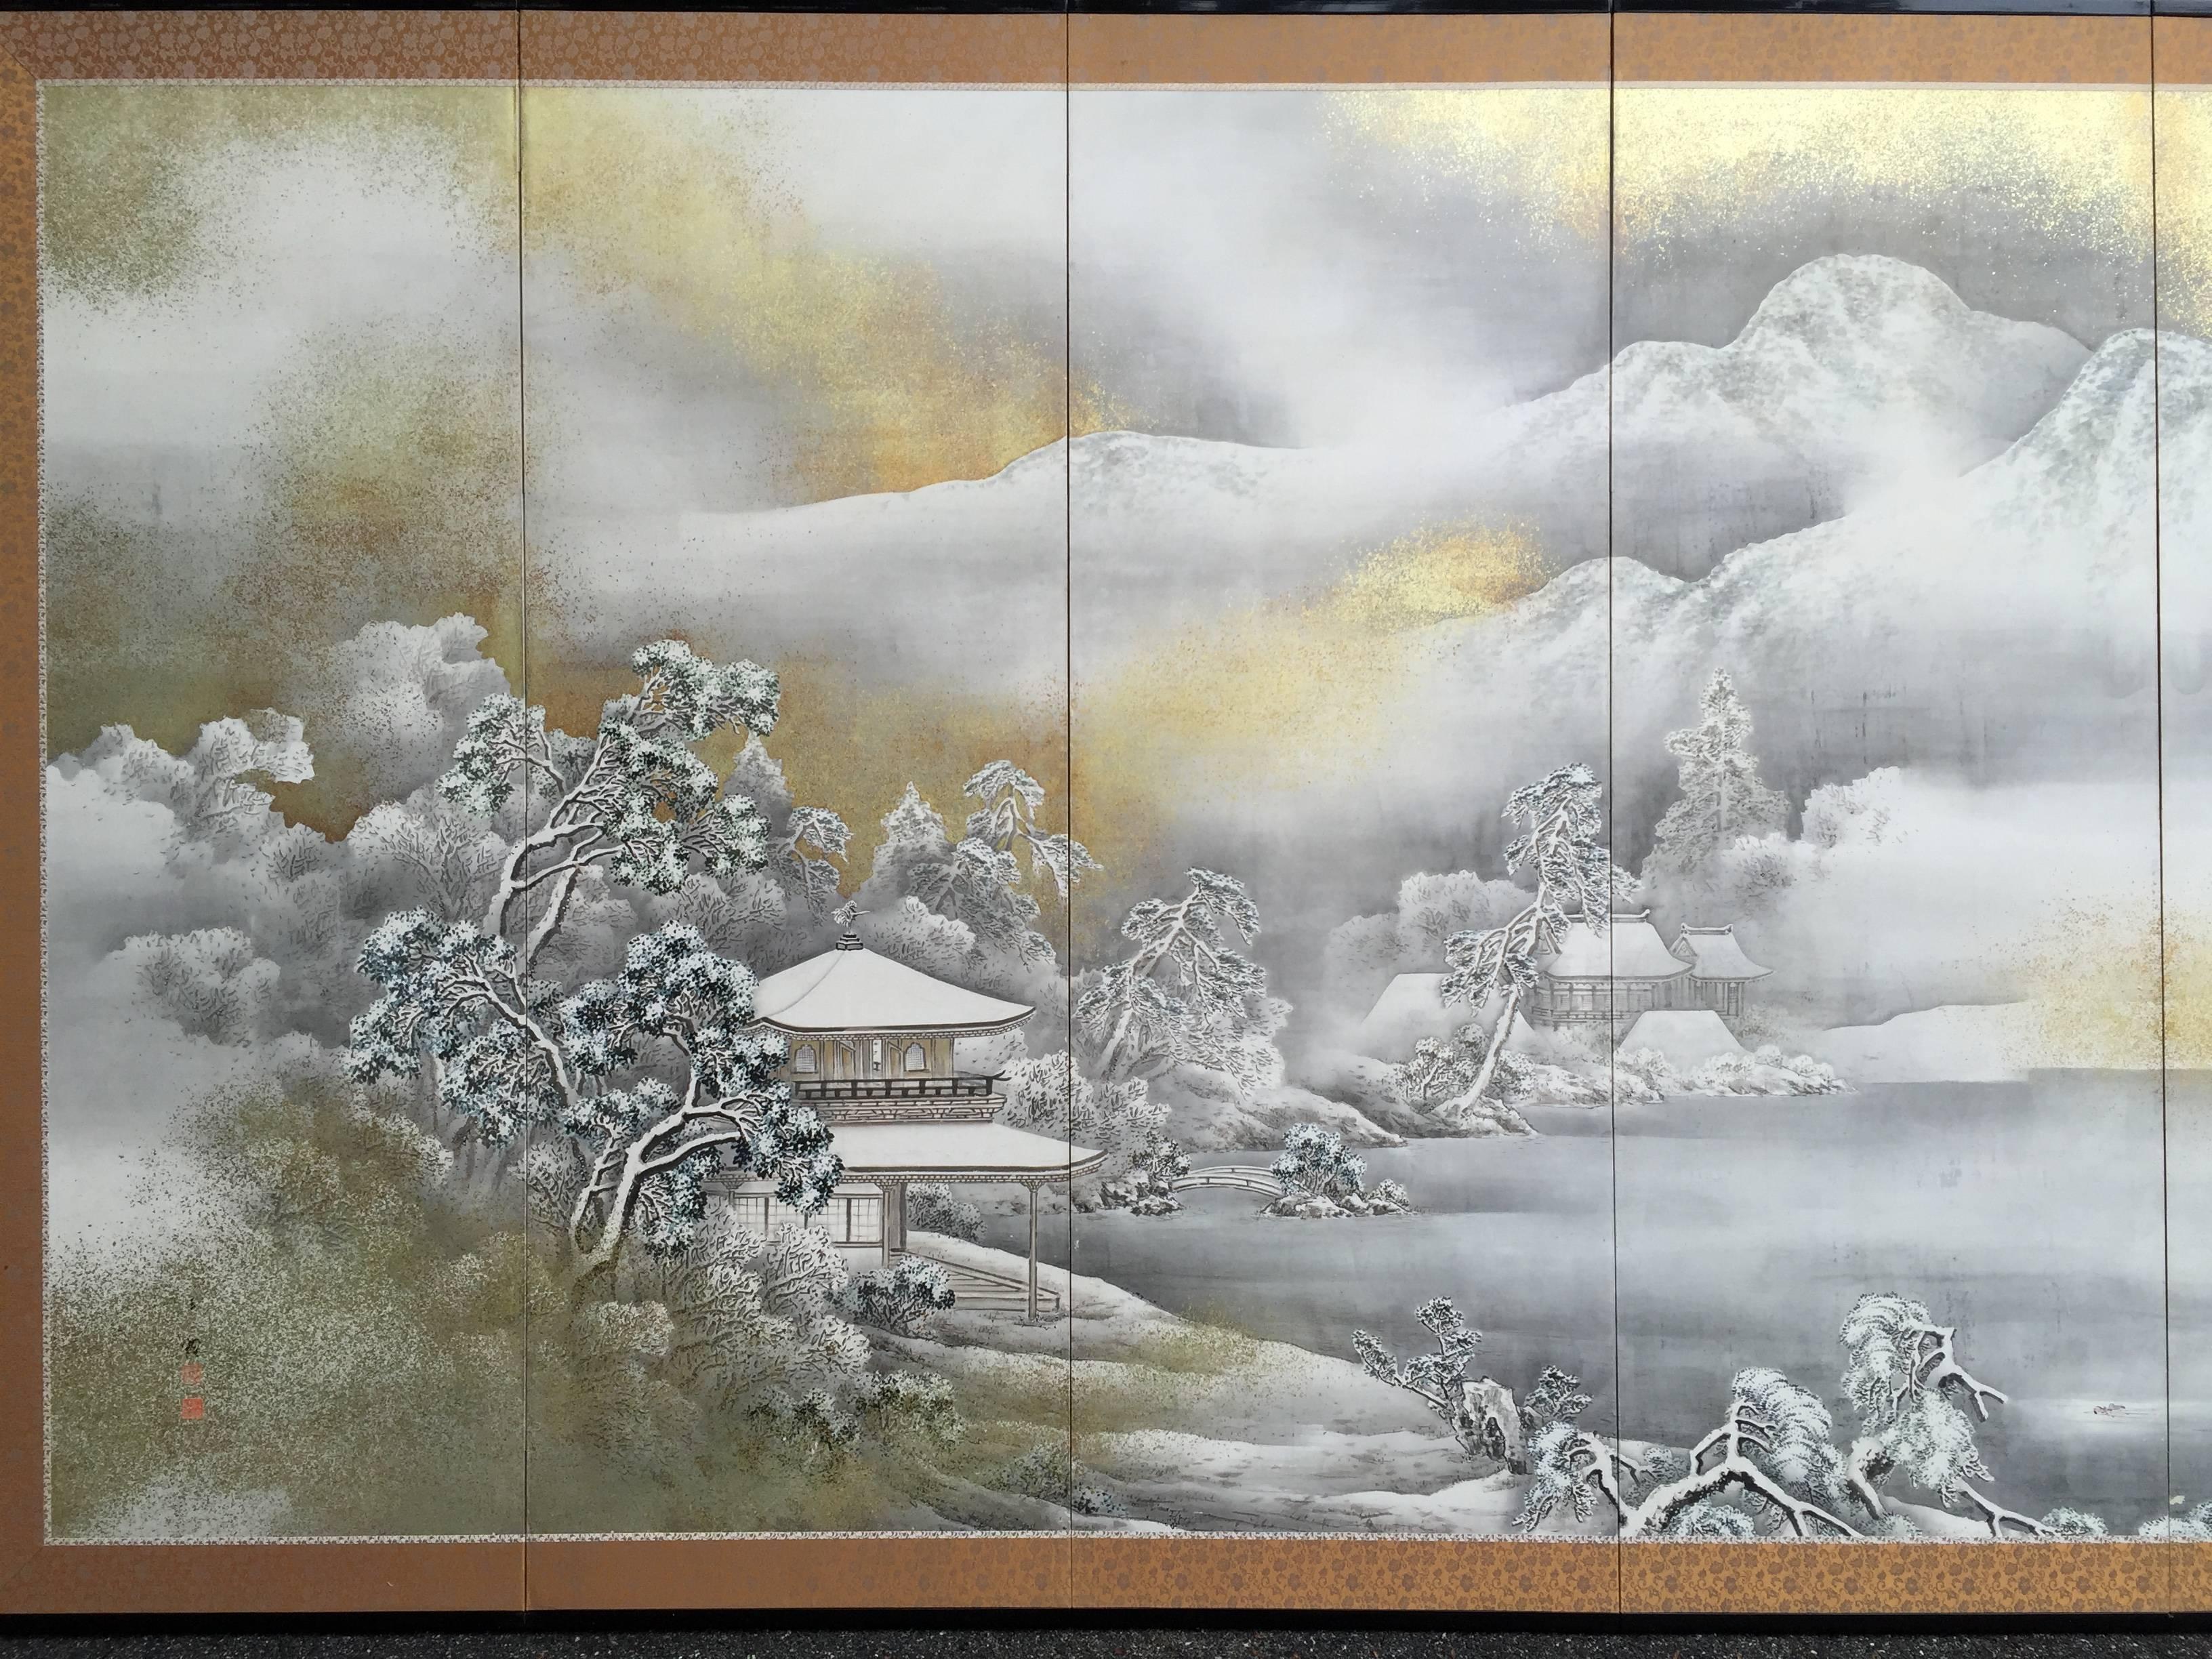 Japan, a fine Mountain Country House winter screen, gold and pigment on silk ,six-panels, measuring 141 inches in length fully extended and 68.75 inches in height

Period:  Taisho period (1912-1926).

Quality:  Mineral pigments, gofun (crushed